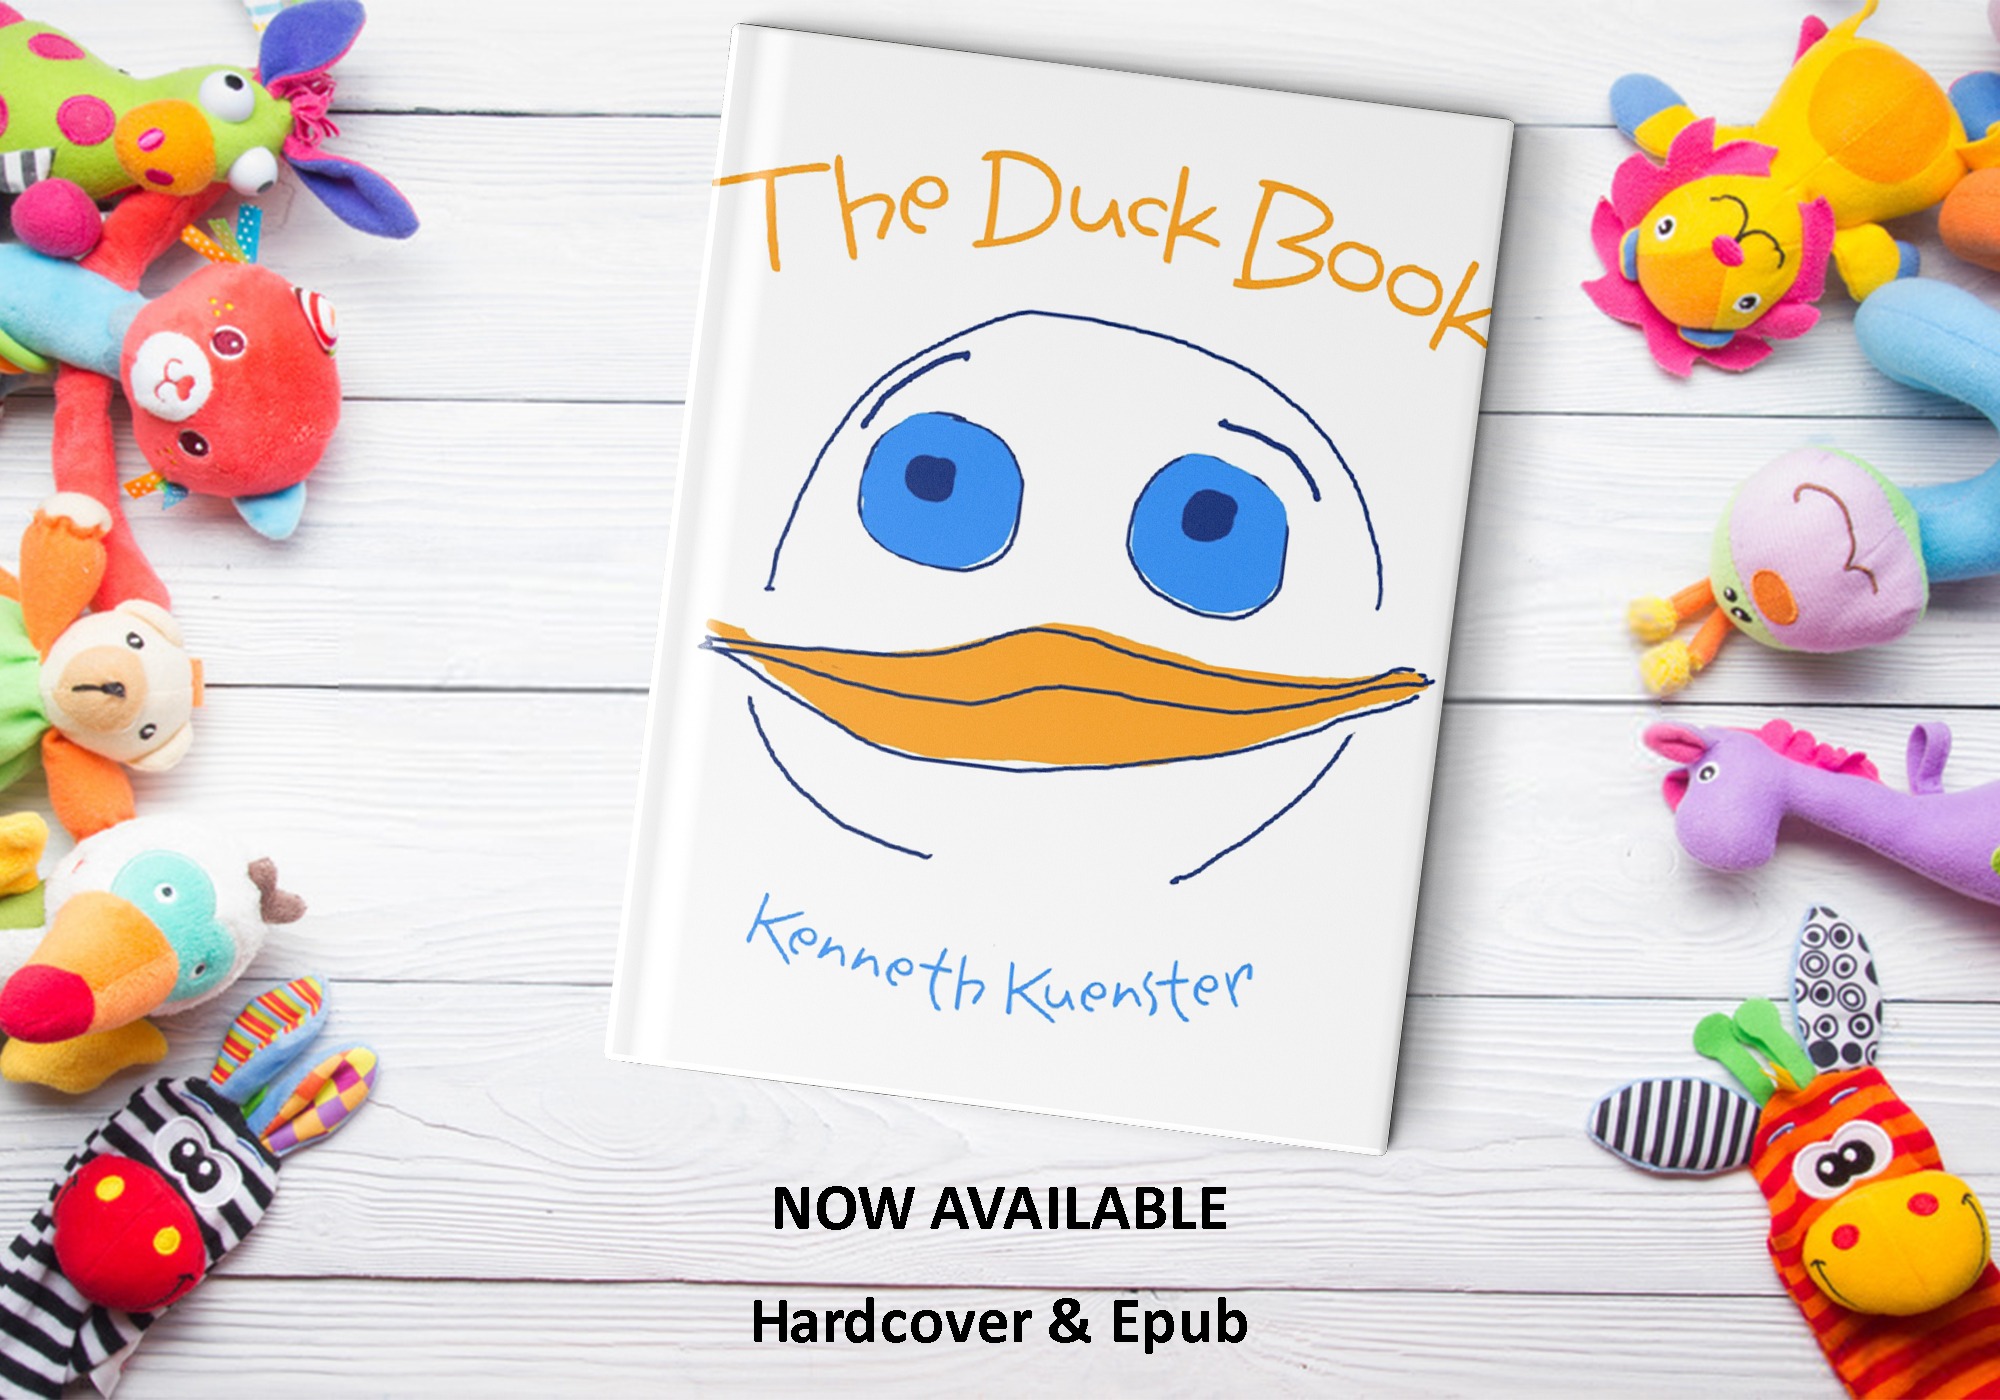 The Duck Book by Kenneth Kuenster